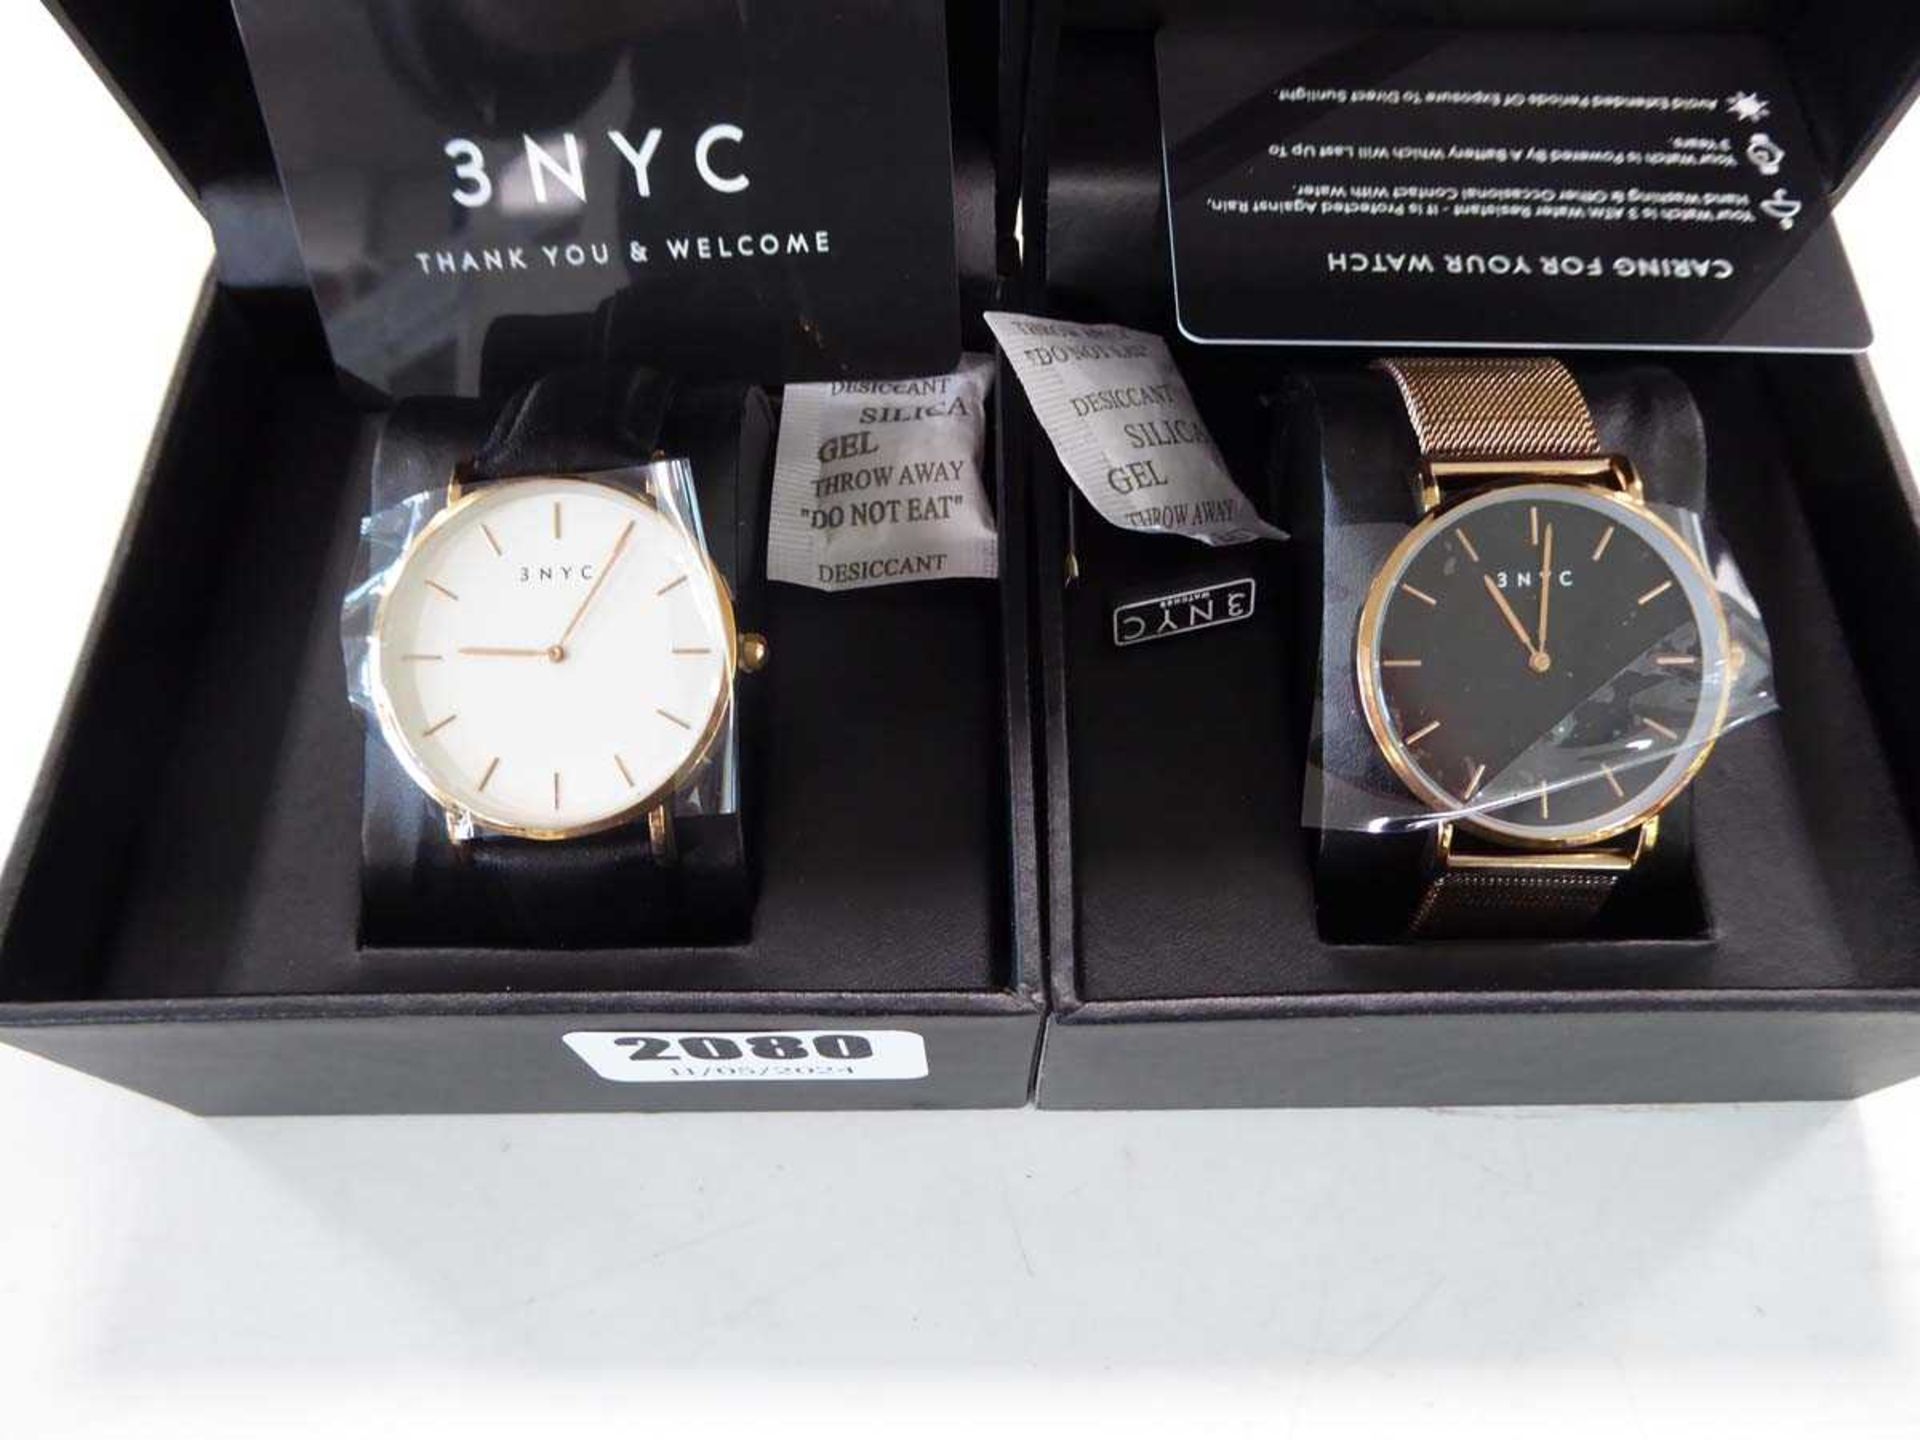 2x 3 NYC wristwatches, 1 with black strap and white face and 1 with golden strap and black face - Image 2 of 2